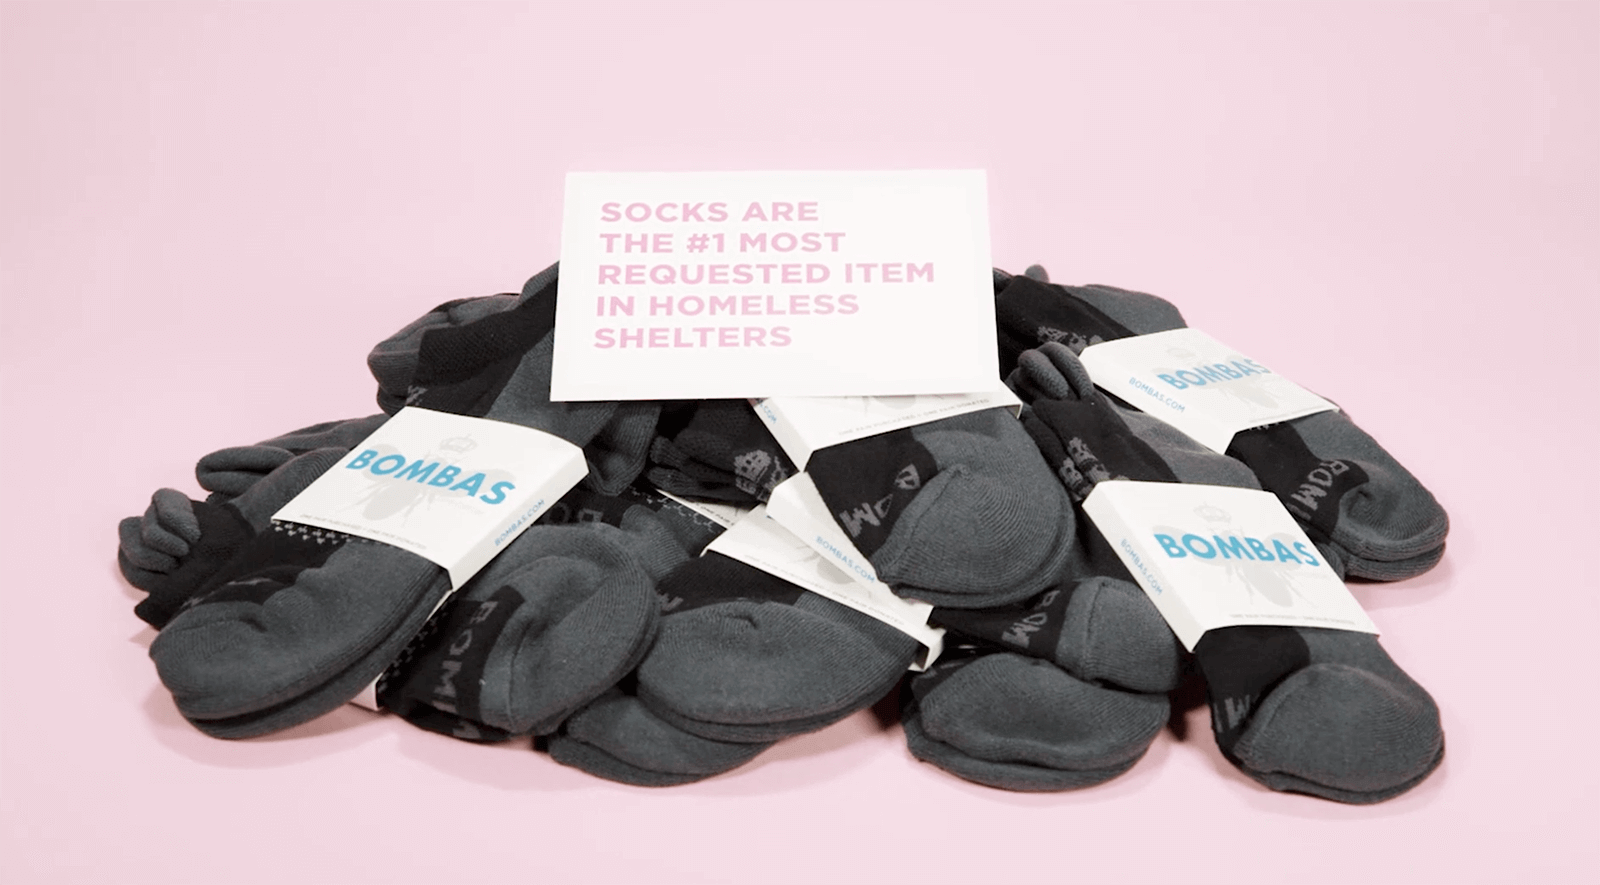 One Purchased = One Donated for all Bombas products